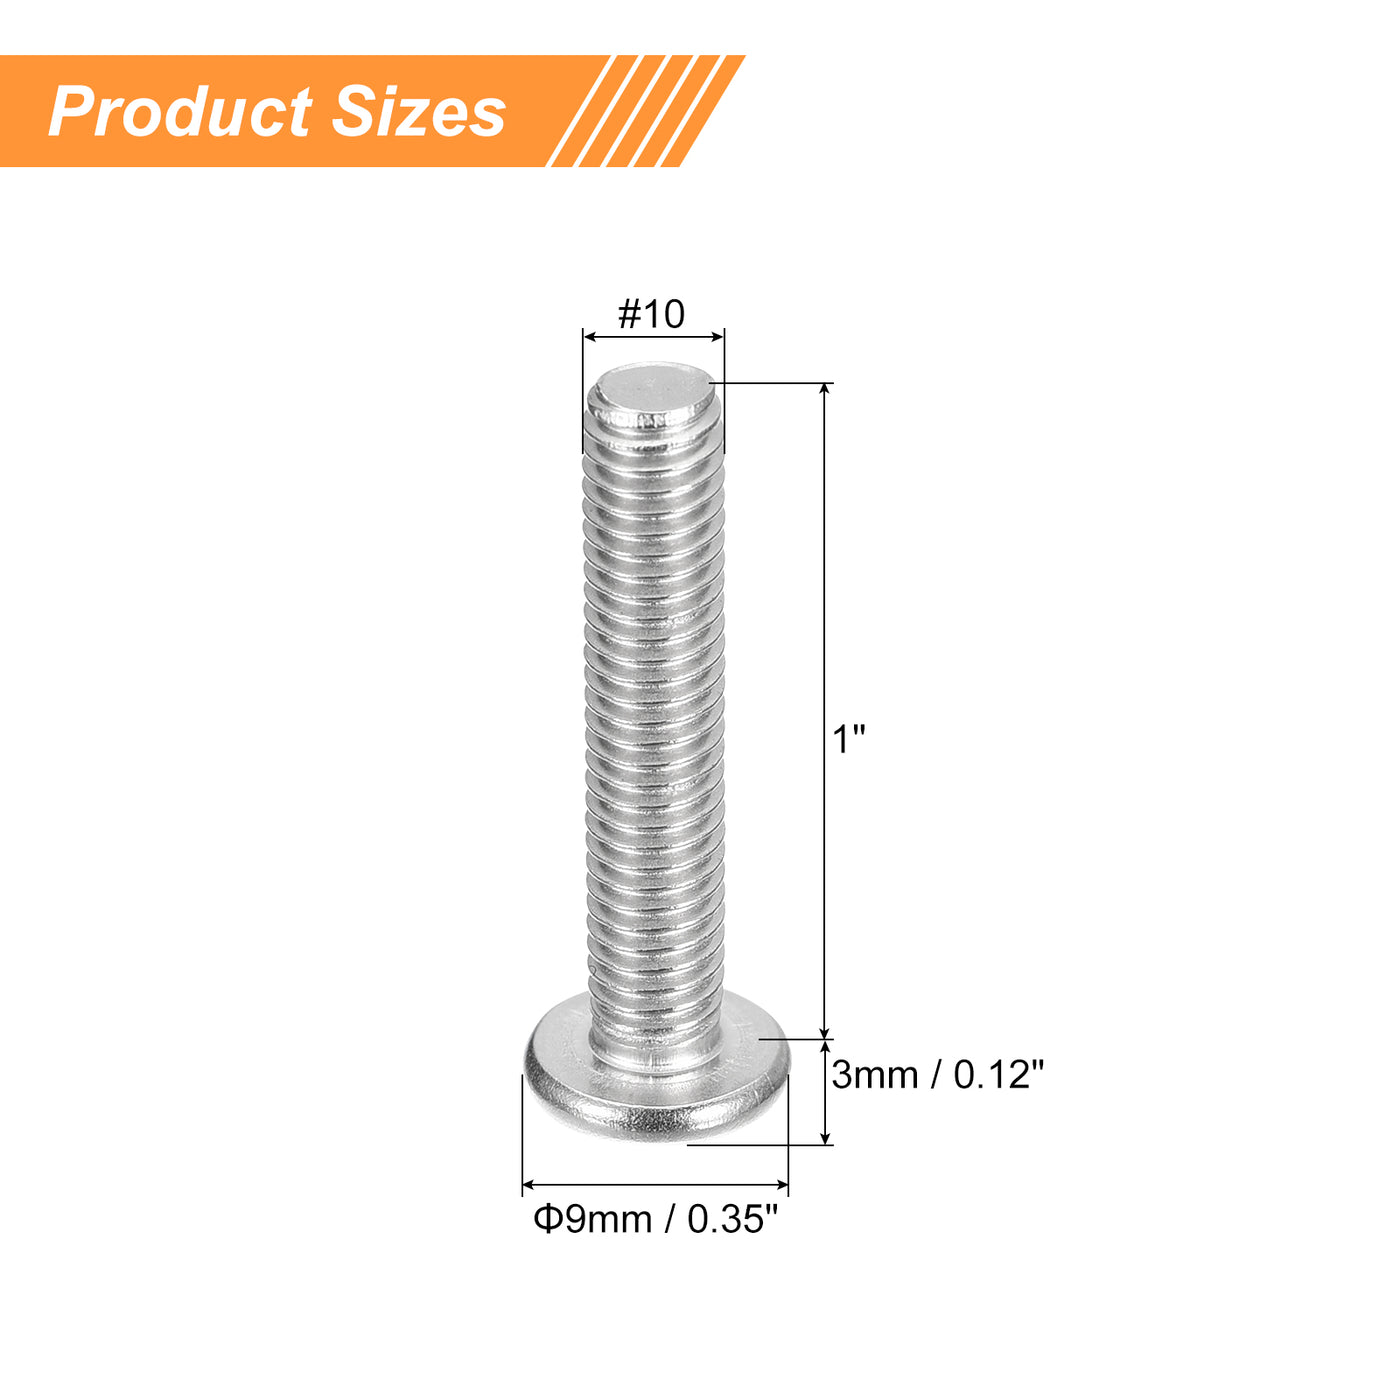 uxcell Uxcell #10-32x1" Pan Head Machine Screws, Stainless Steel 18-8 Screw, Pack of 20